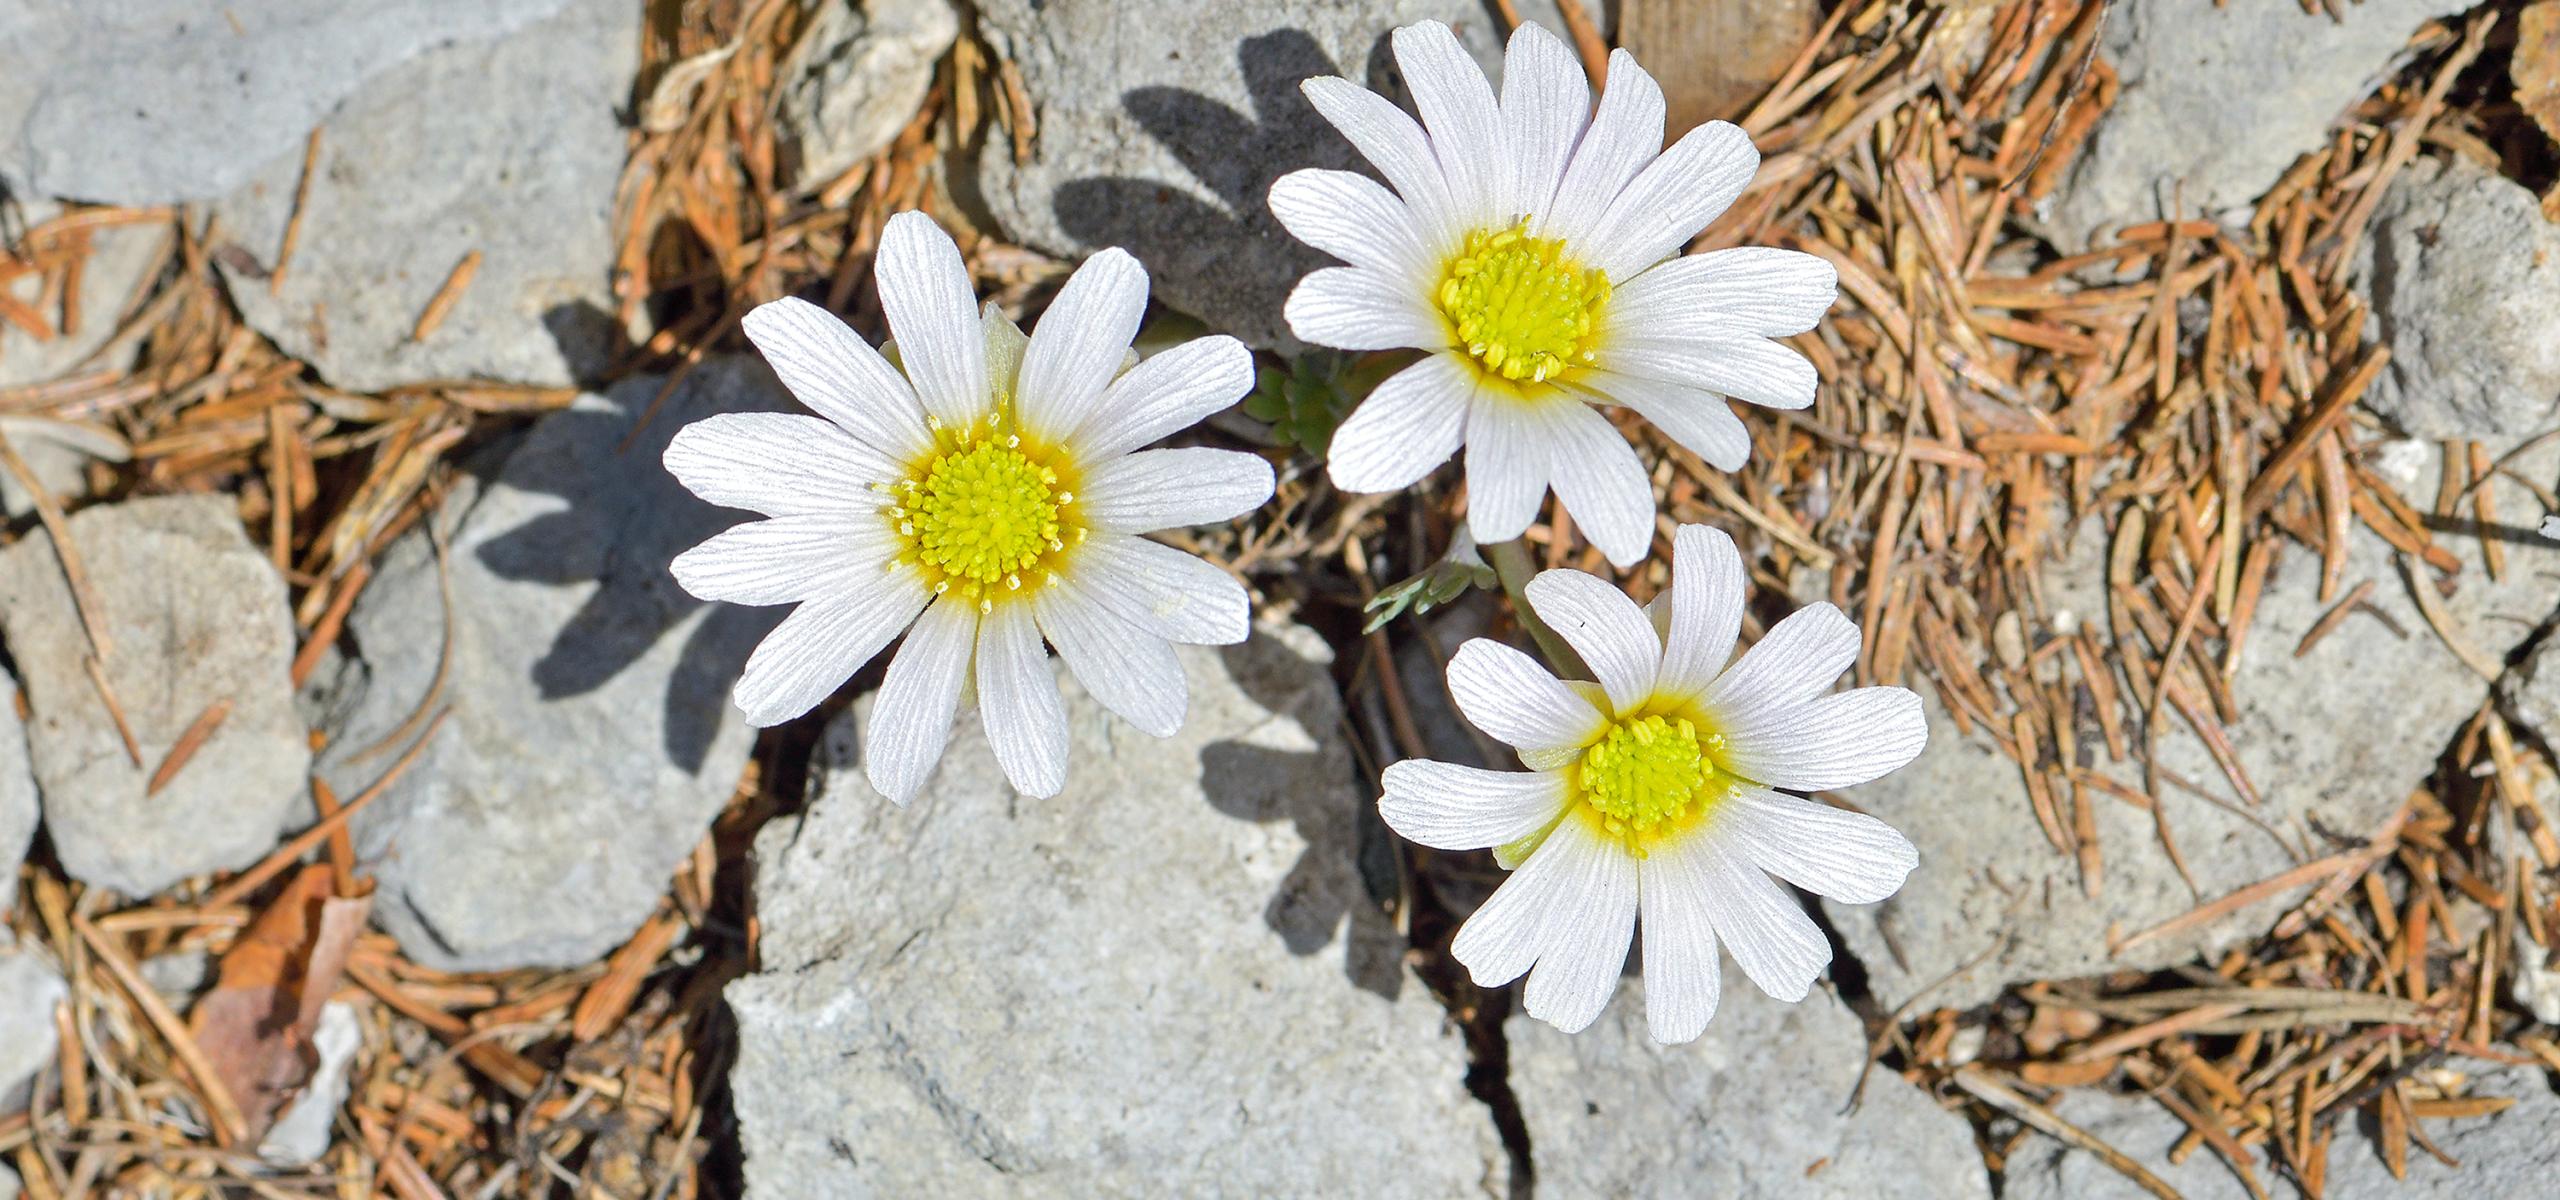 Three delicate white anemones with yellow flower heads bloom between the limestone rocks